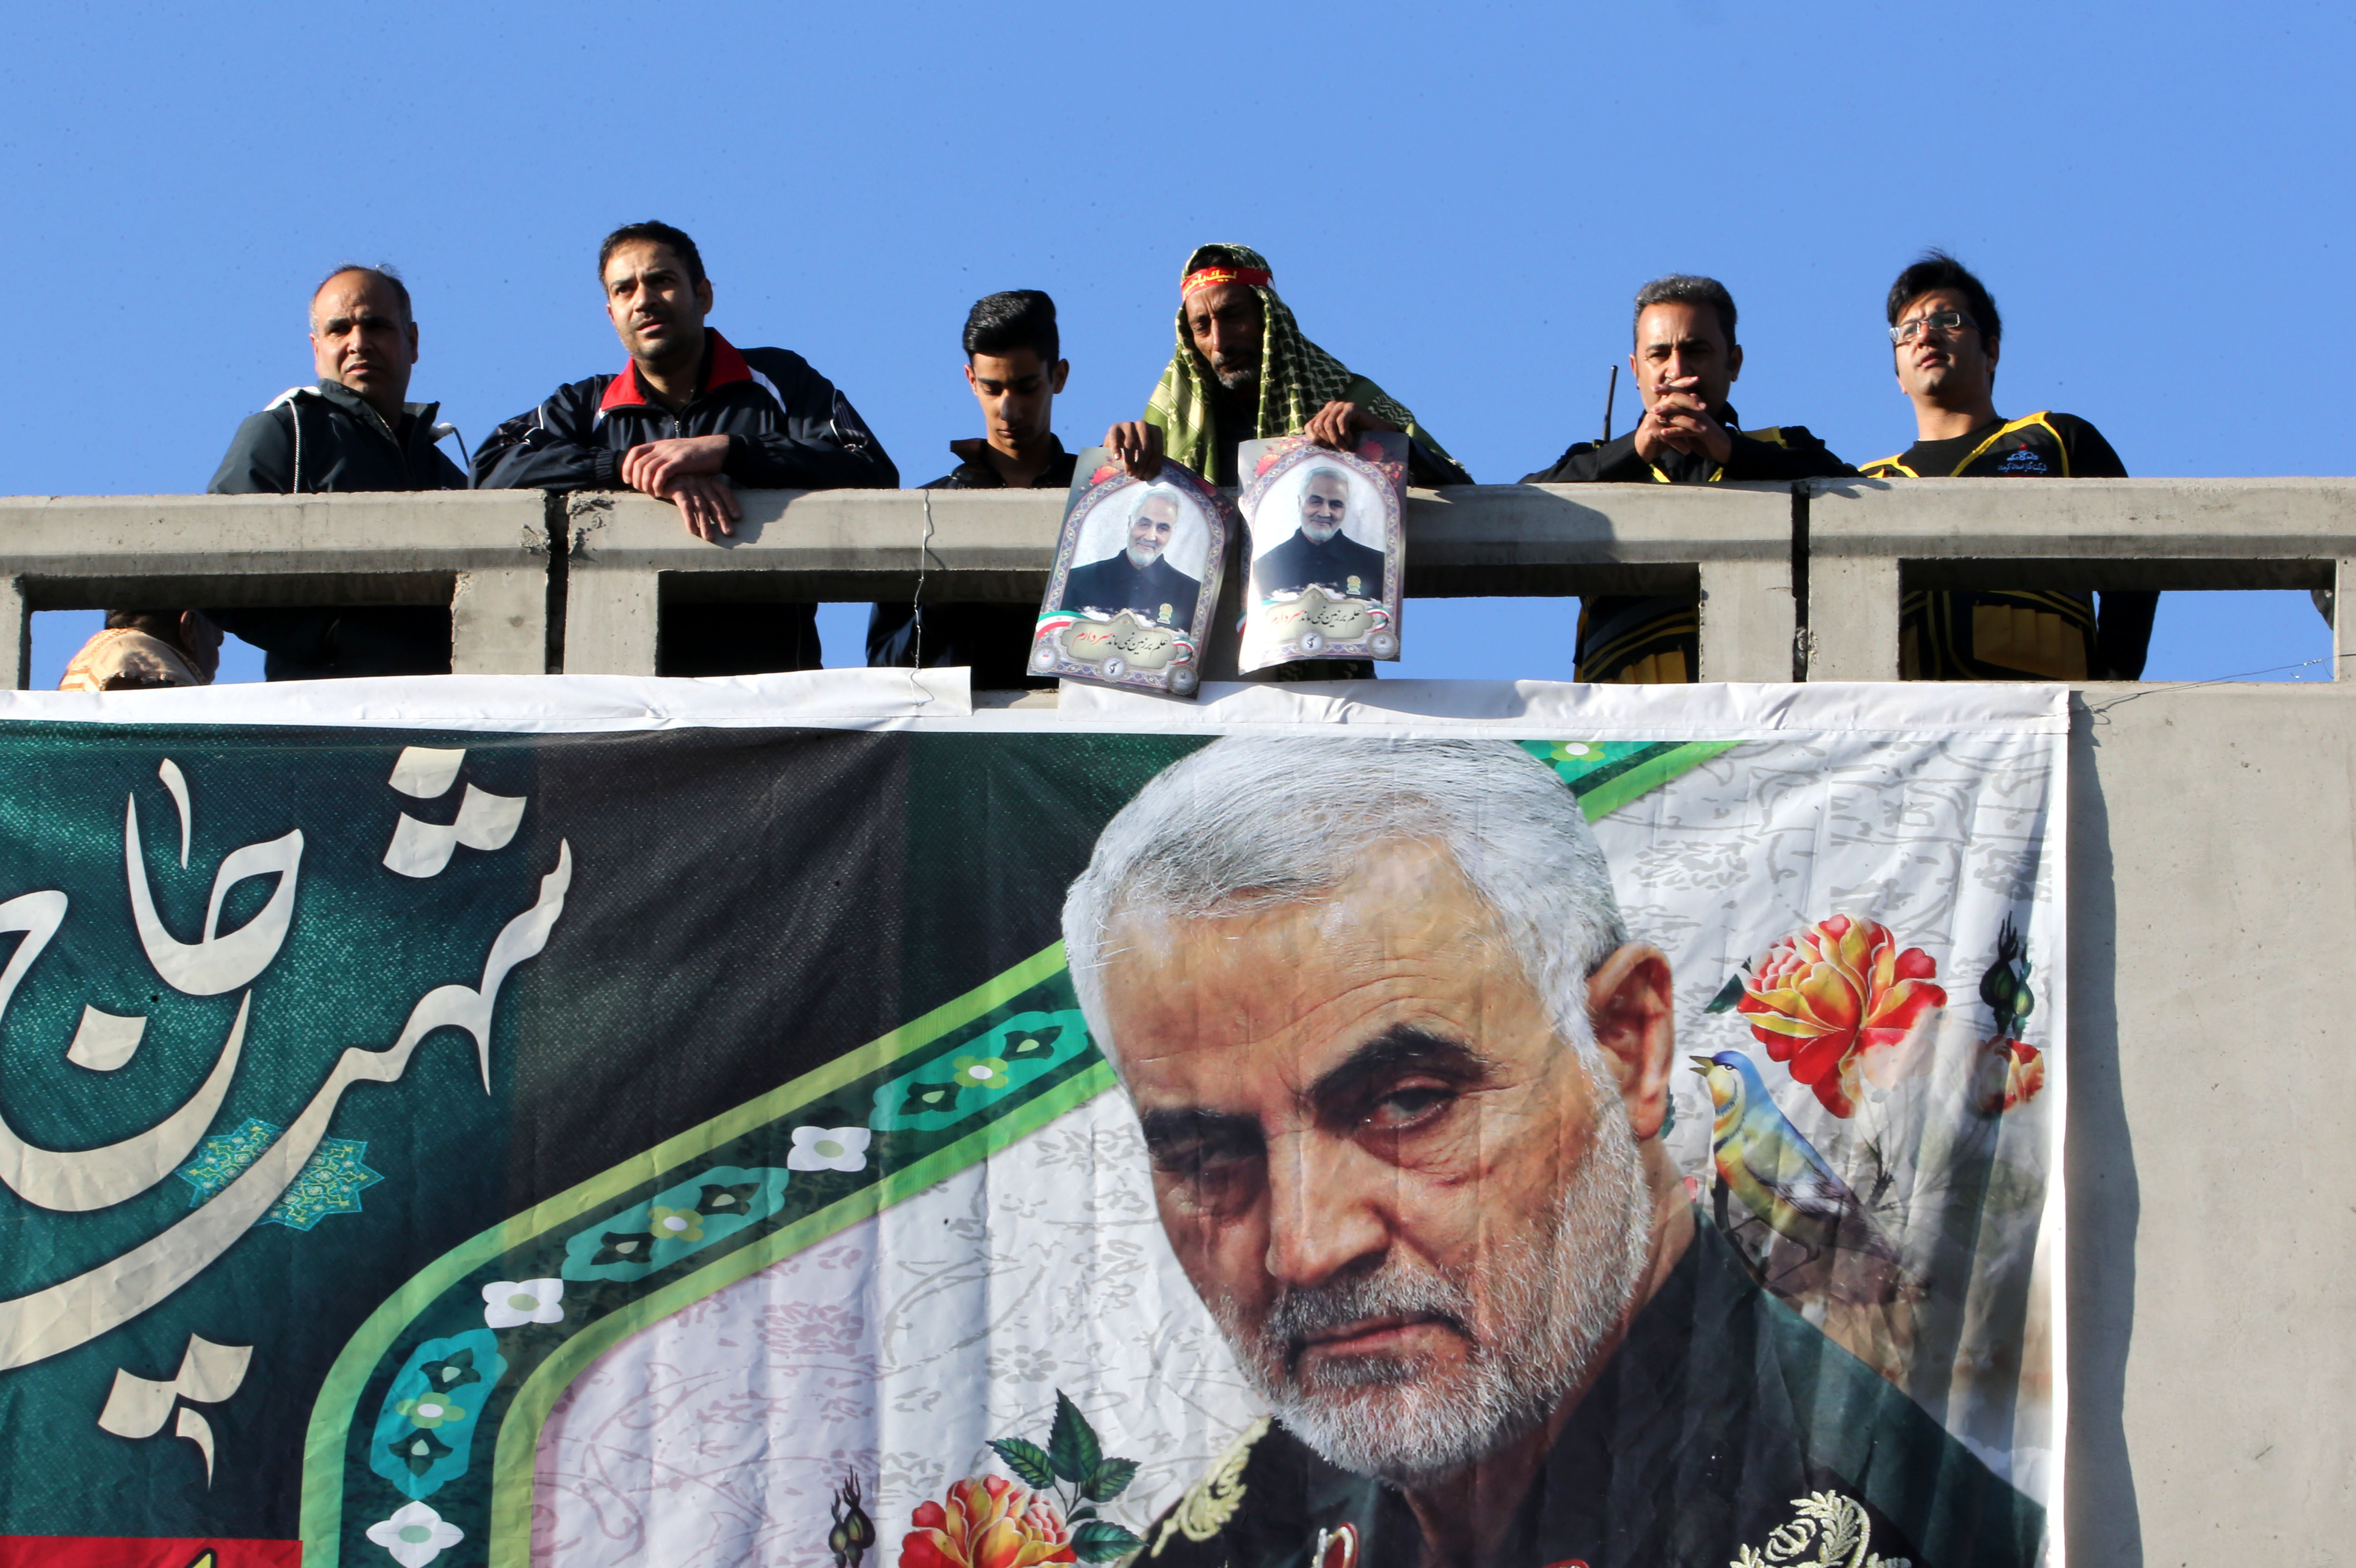 Iranian mourners stand on a bridge during the final stage of funeral processions for slain top general Qasem Soleimani, in his hometown Kerman on January 7, 2020. - Soleimani was killed outside Baghdad airport on January 3 in a drone strike ordered by US President Donald Trump, ratcheting up tensions with arch-enemy Iran which has vowed "severe revenge". The assassination of the 62-year-old heightened international concern about a new war in the volatile, oil-rich Middle East and rattled financial markets. (Photo by ATTA KENARE / AFP) (Photo by ATTA KENARE/AFP via Getty Images)